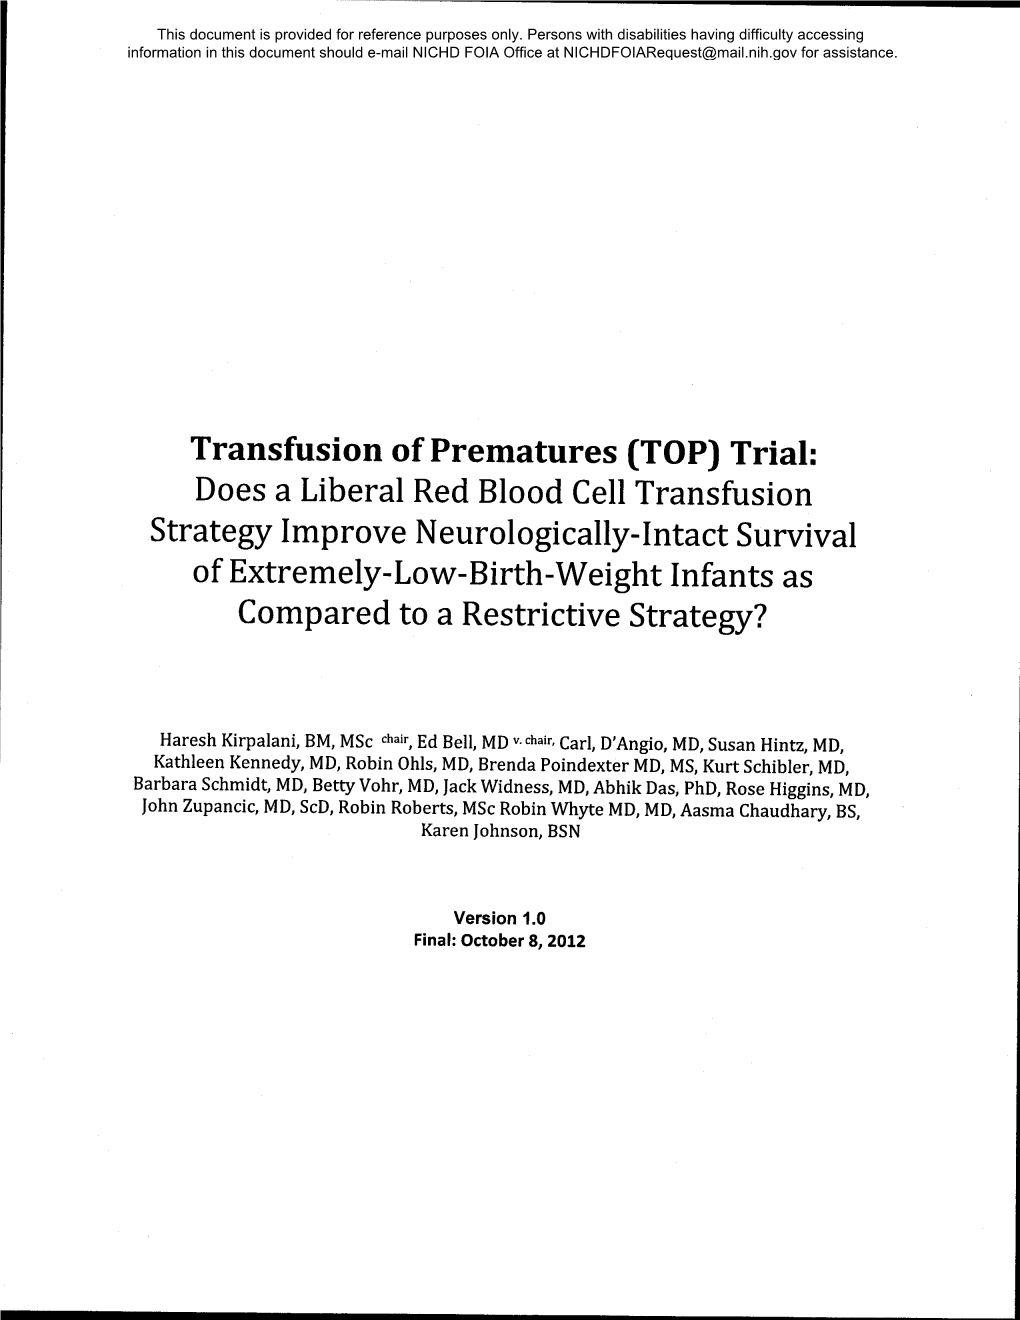 Transfusion of Prematures (TOP) Trial